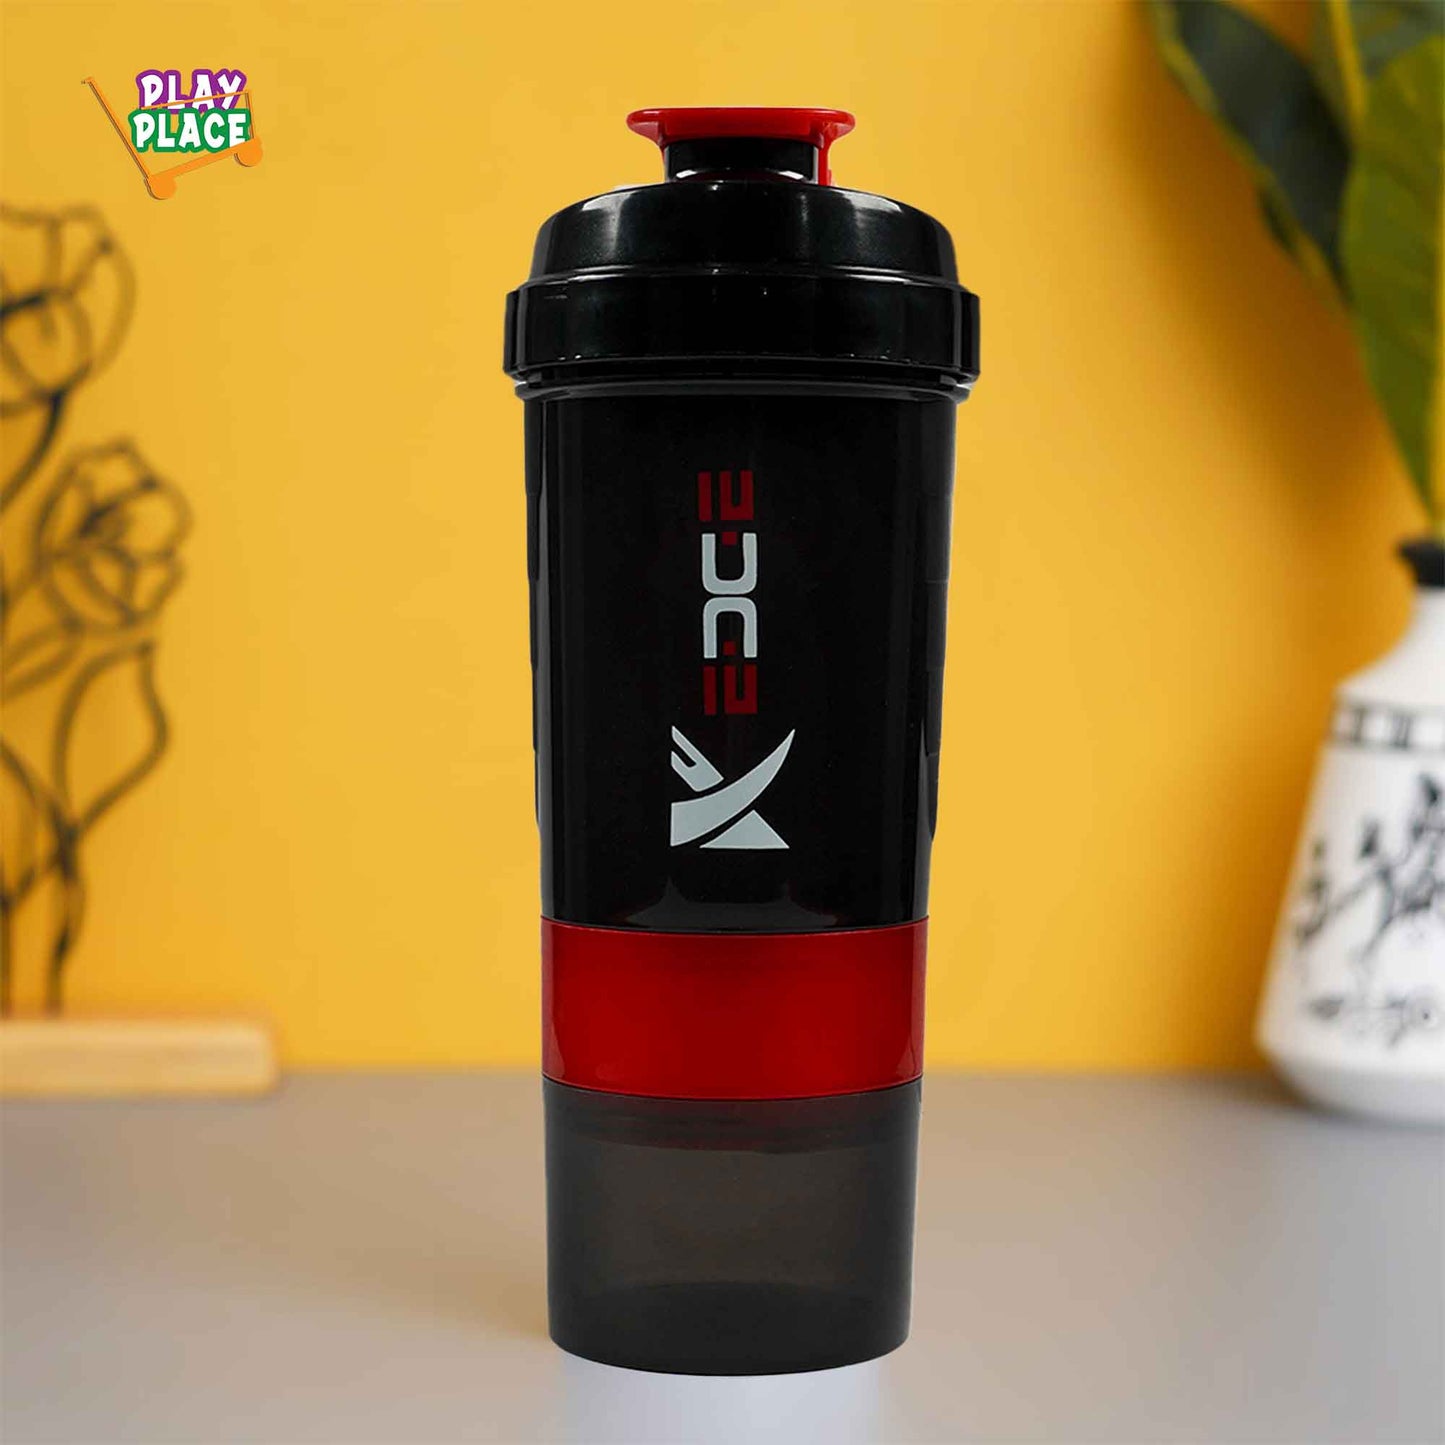 EDGE 3 in 1 Gym Shaker and Bottle